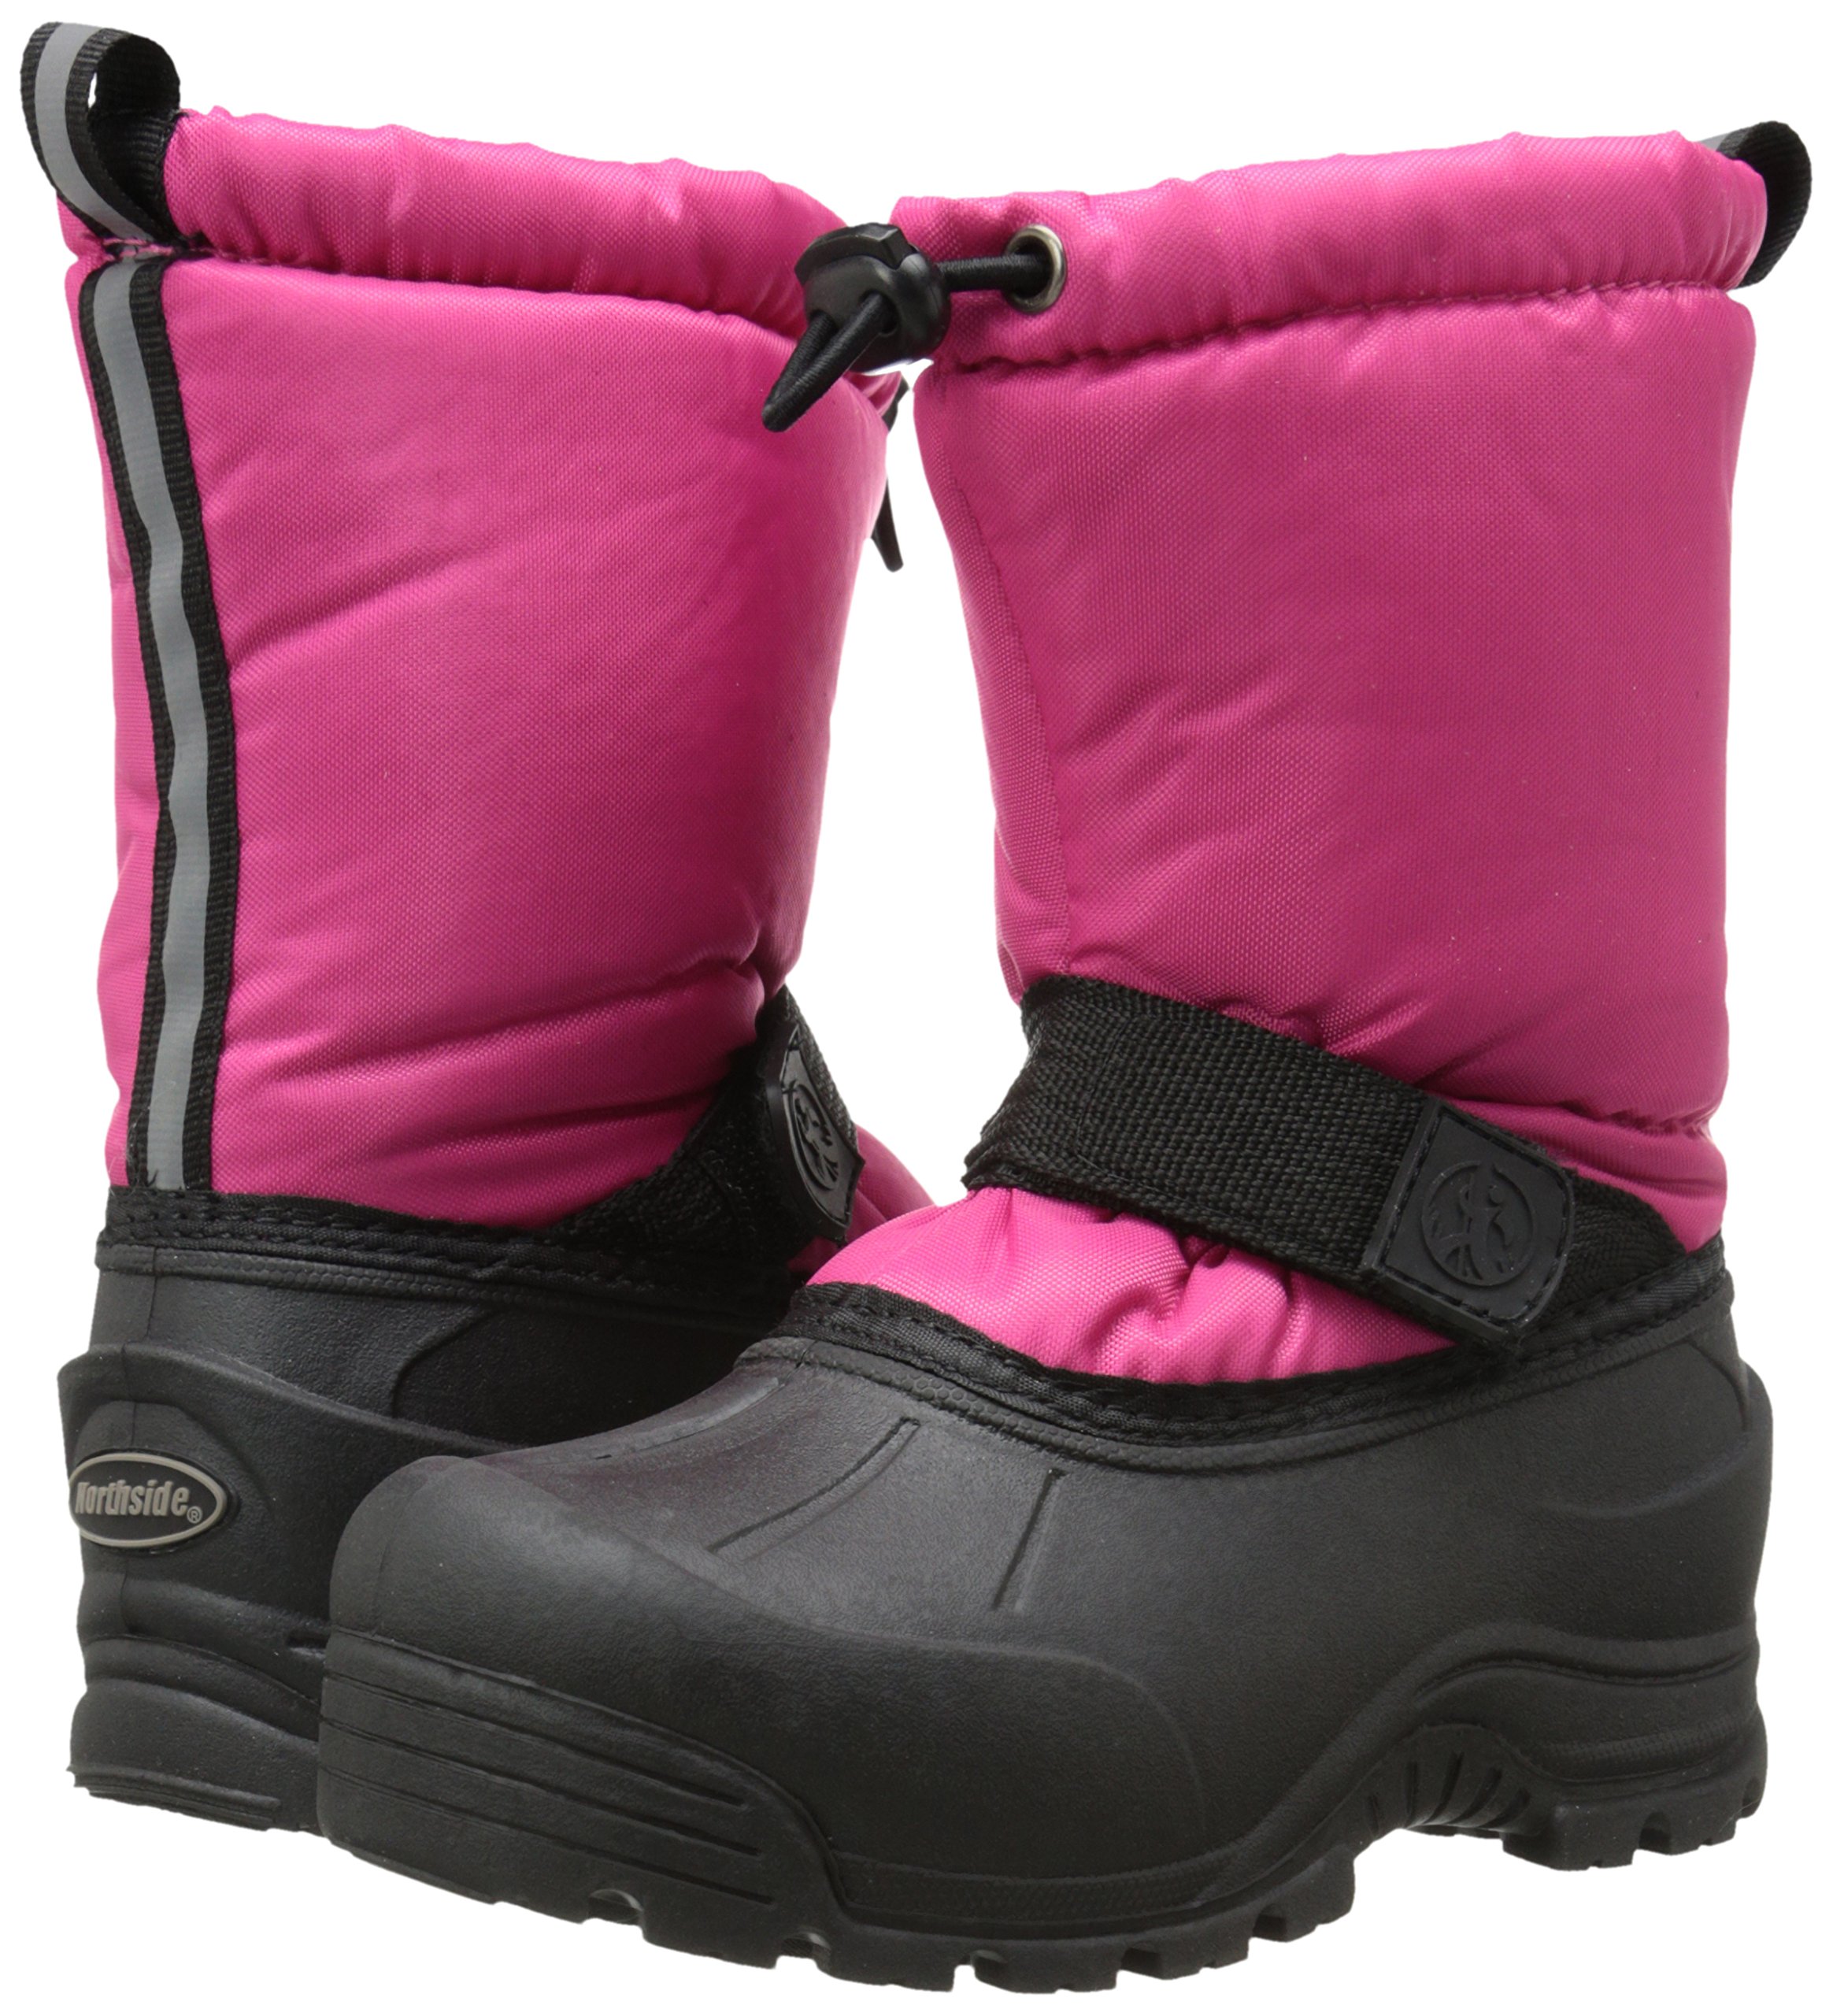 Northside Frosty Insulated Winter Snow Boots for Girls and Boys with Rugged, Water Resistant Nylon Upper, Quick-Drying Lining, Removable EVA Insole, and Durable TPR Outsole